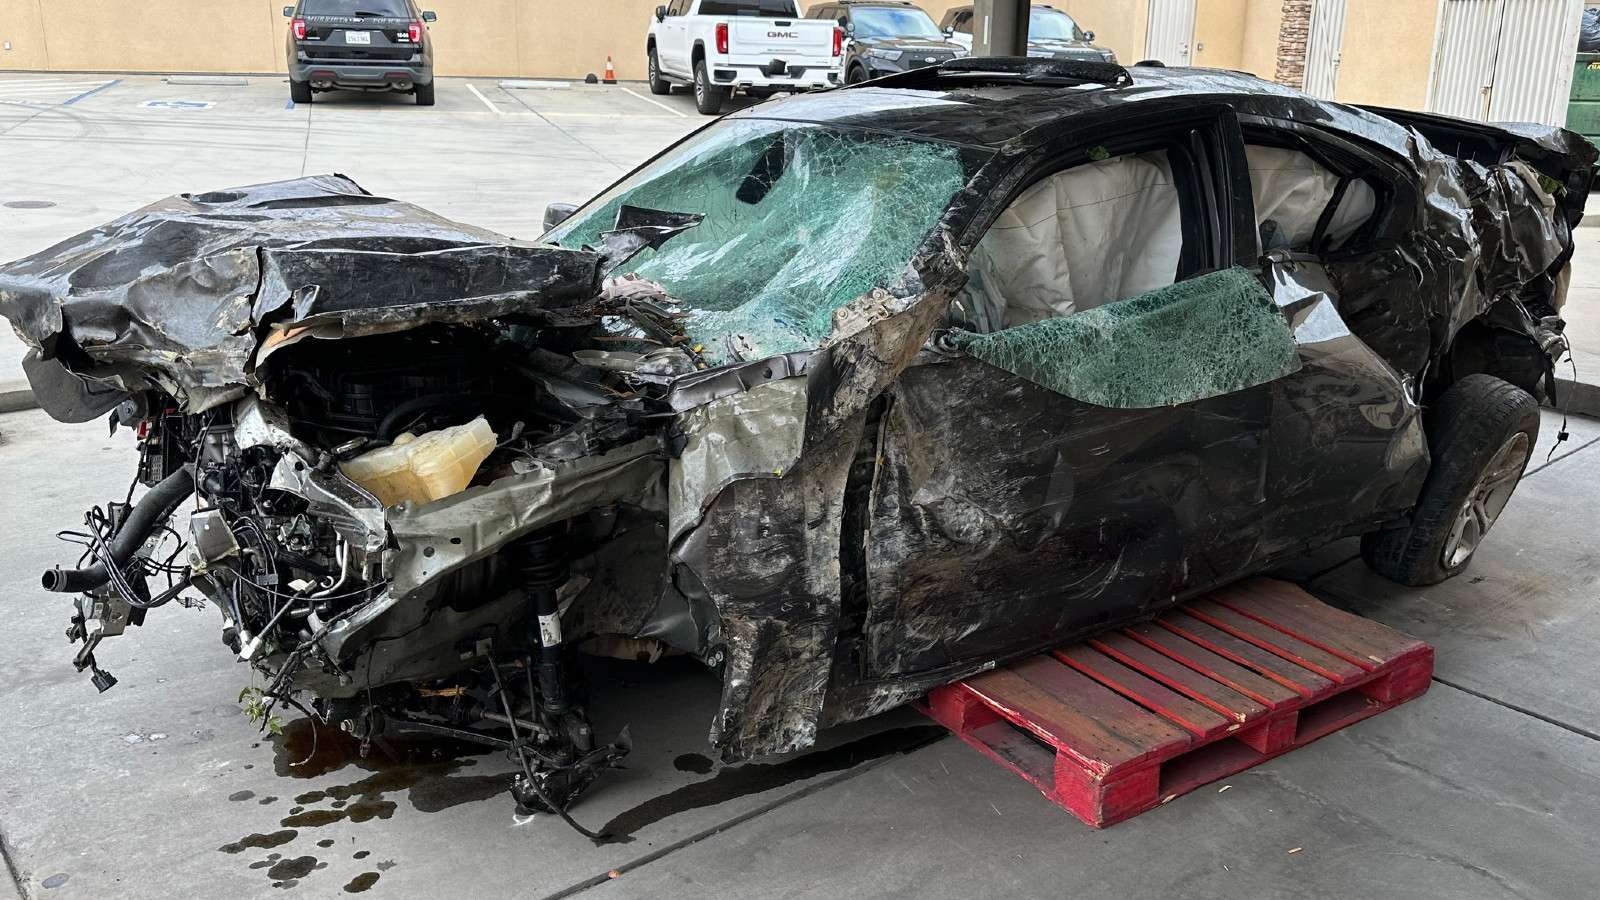 Magic Card Thieves Crash Getaway Car Into House In Wild End To California Police Chase Dexerto 